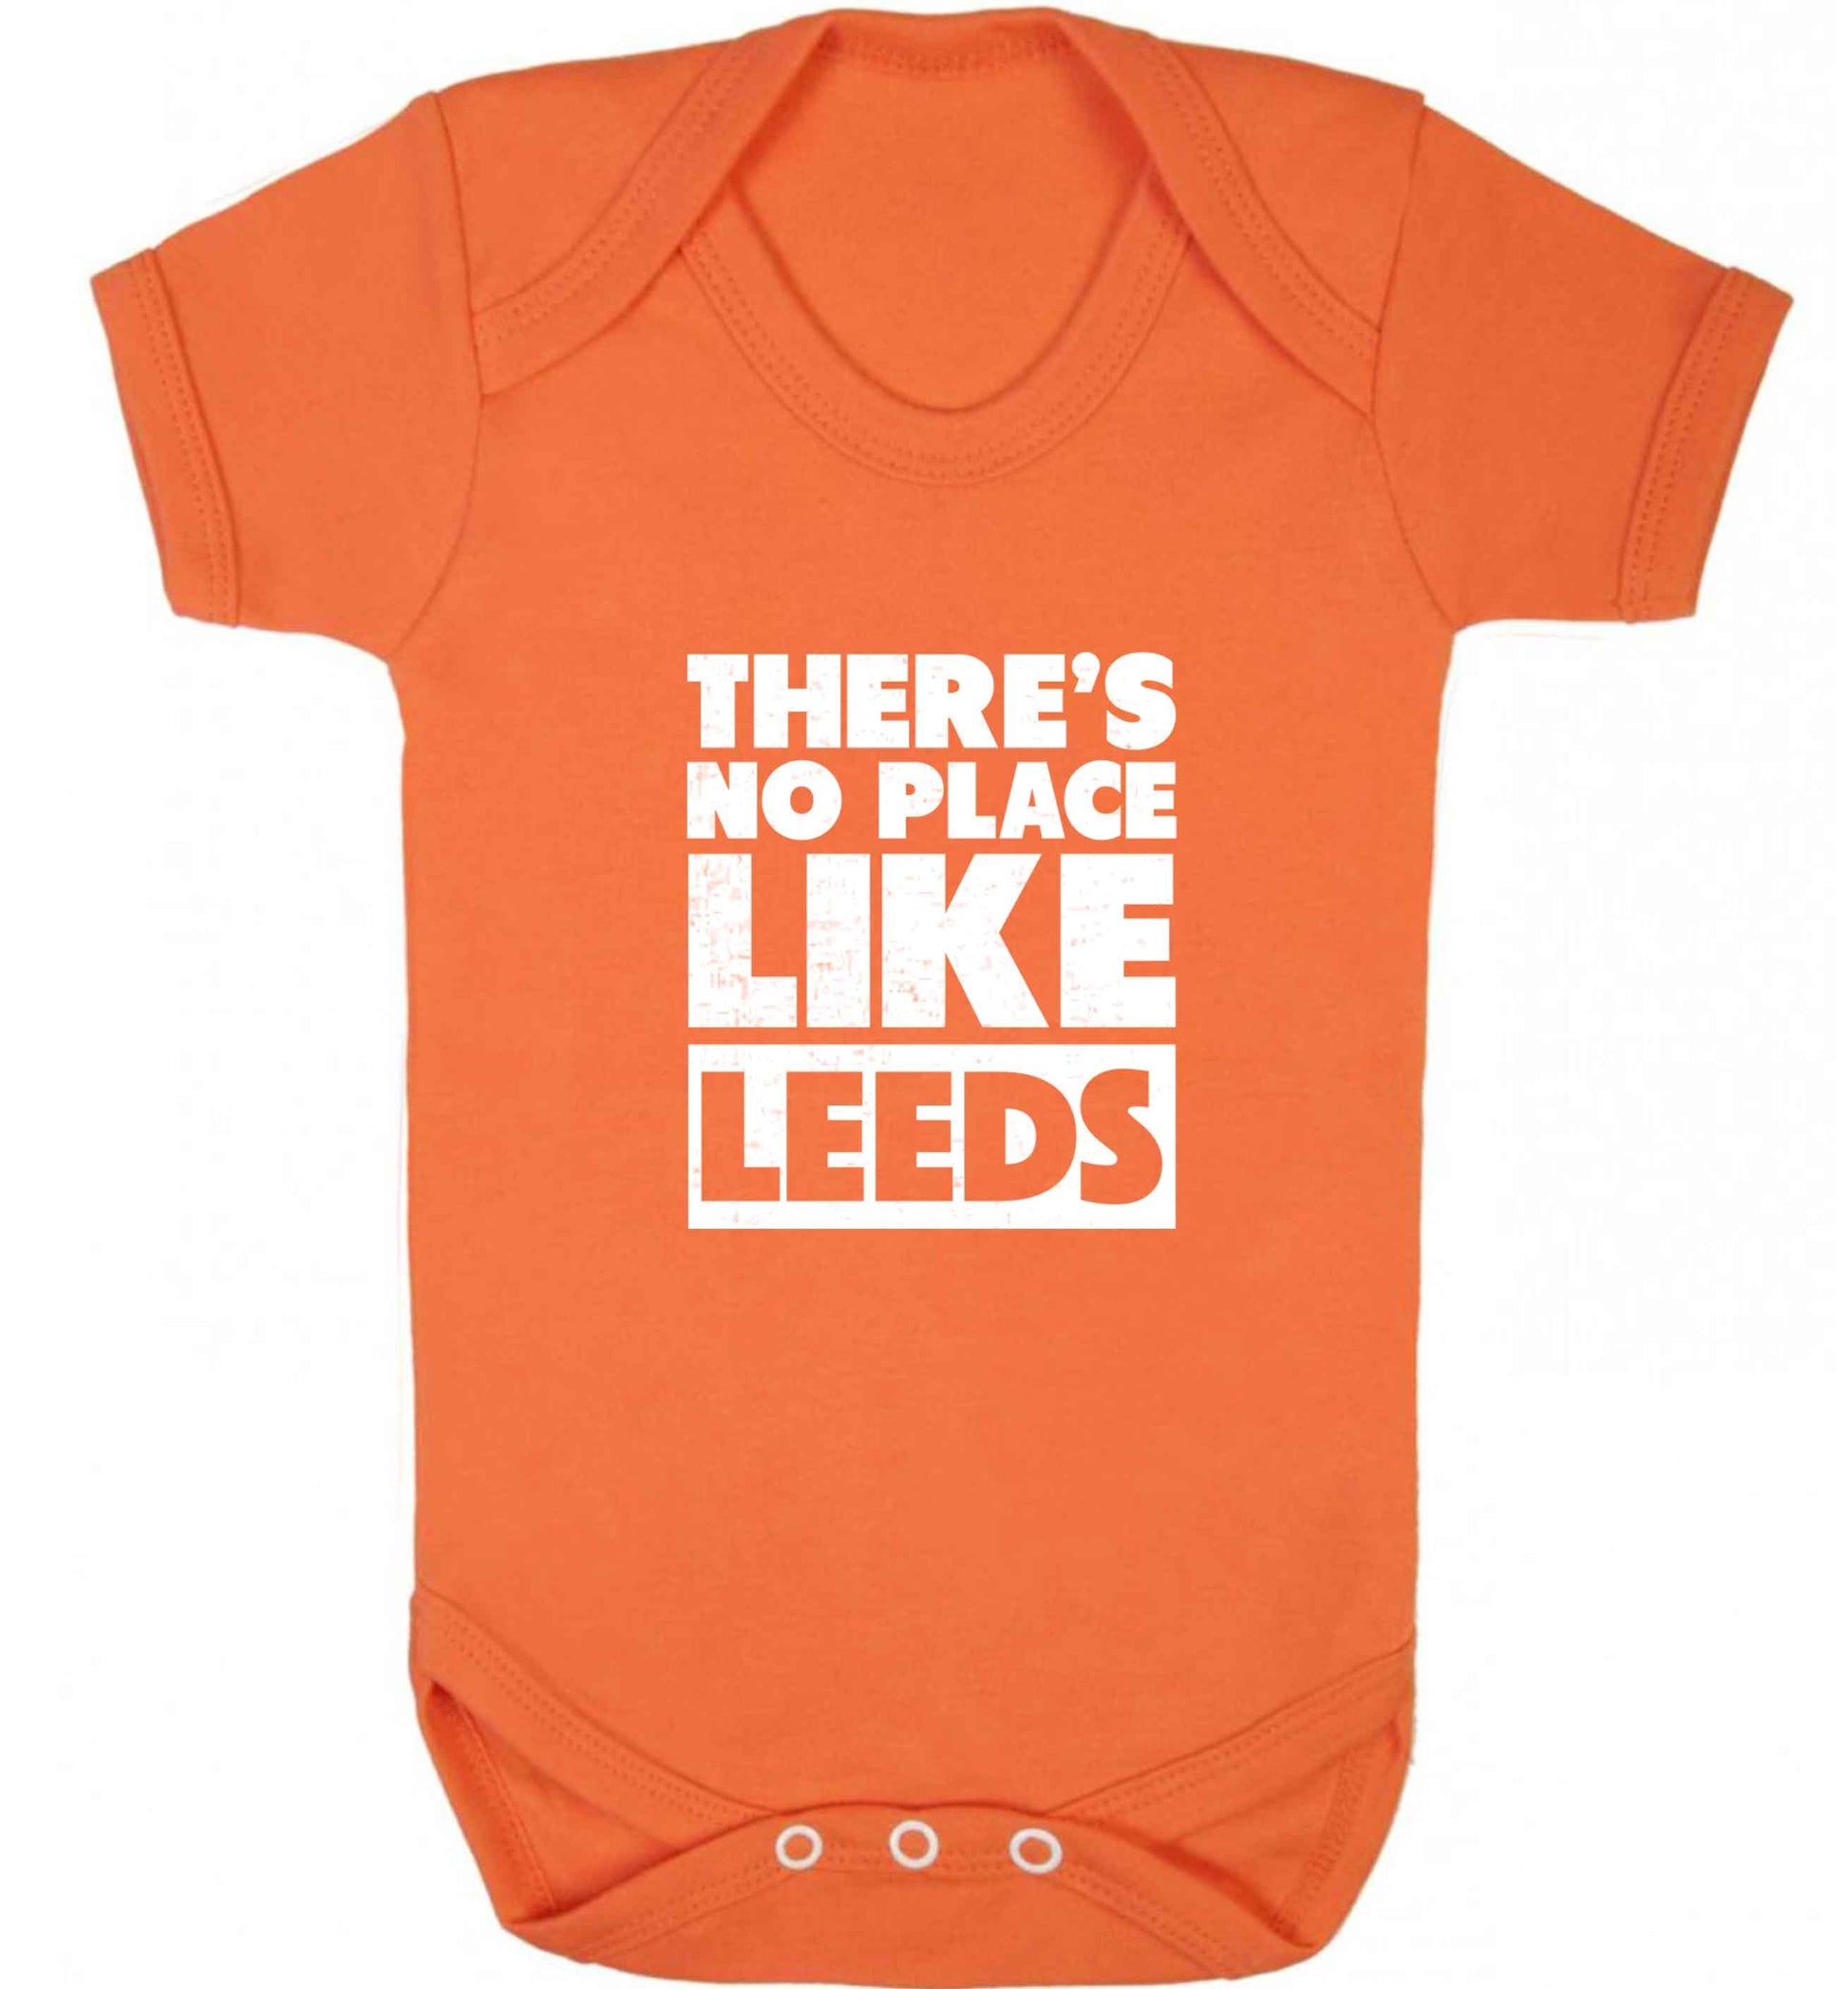 There's no place like Leeds baby vest orange 18-24 months